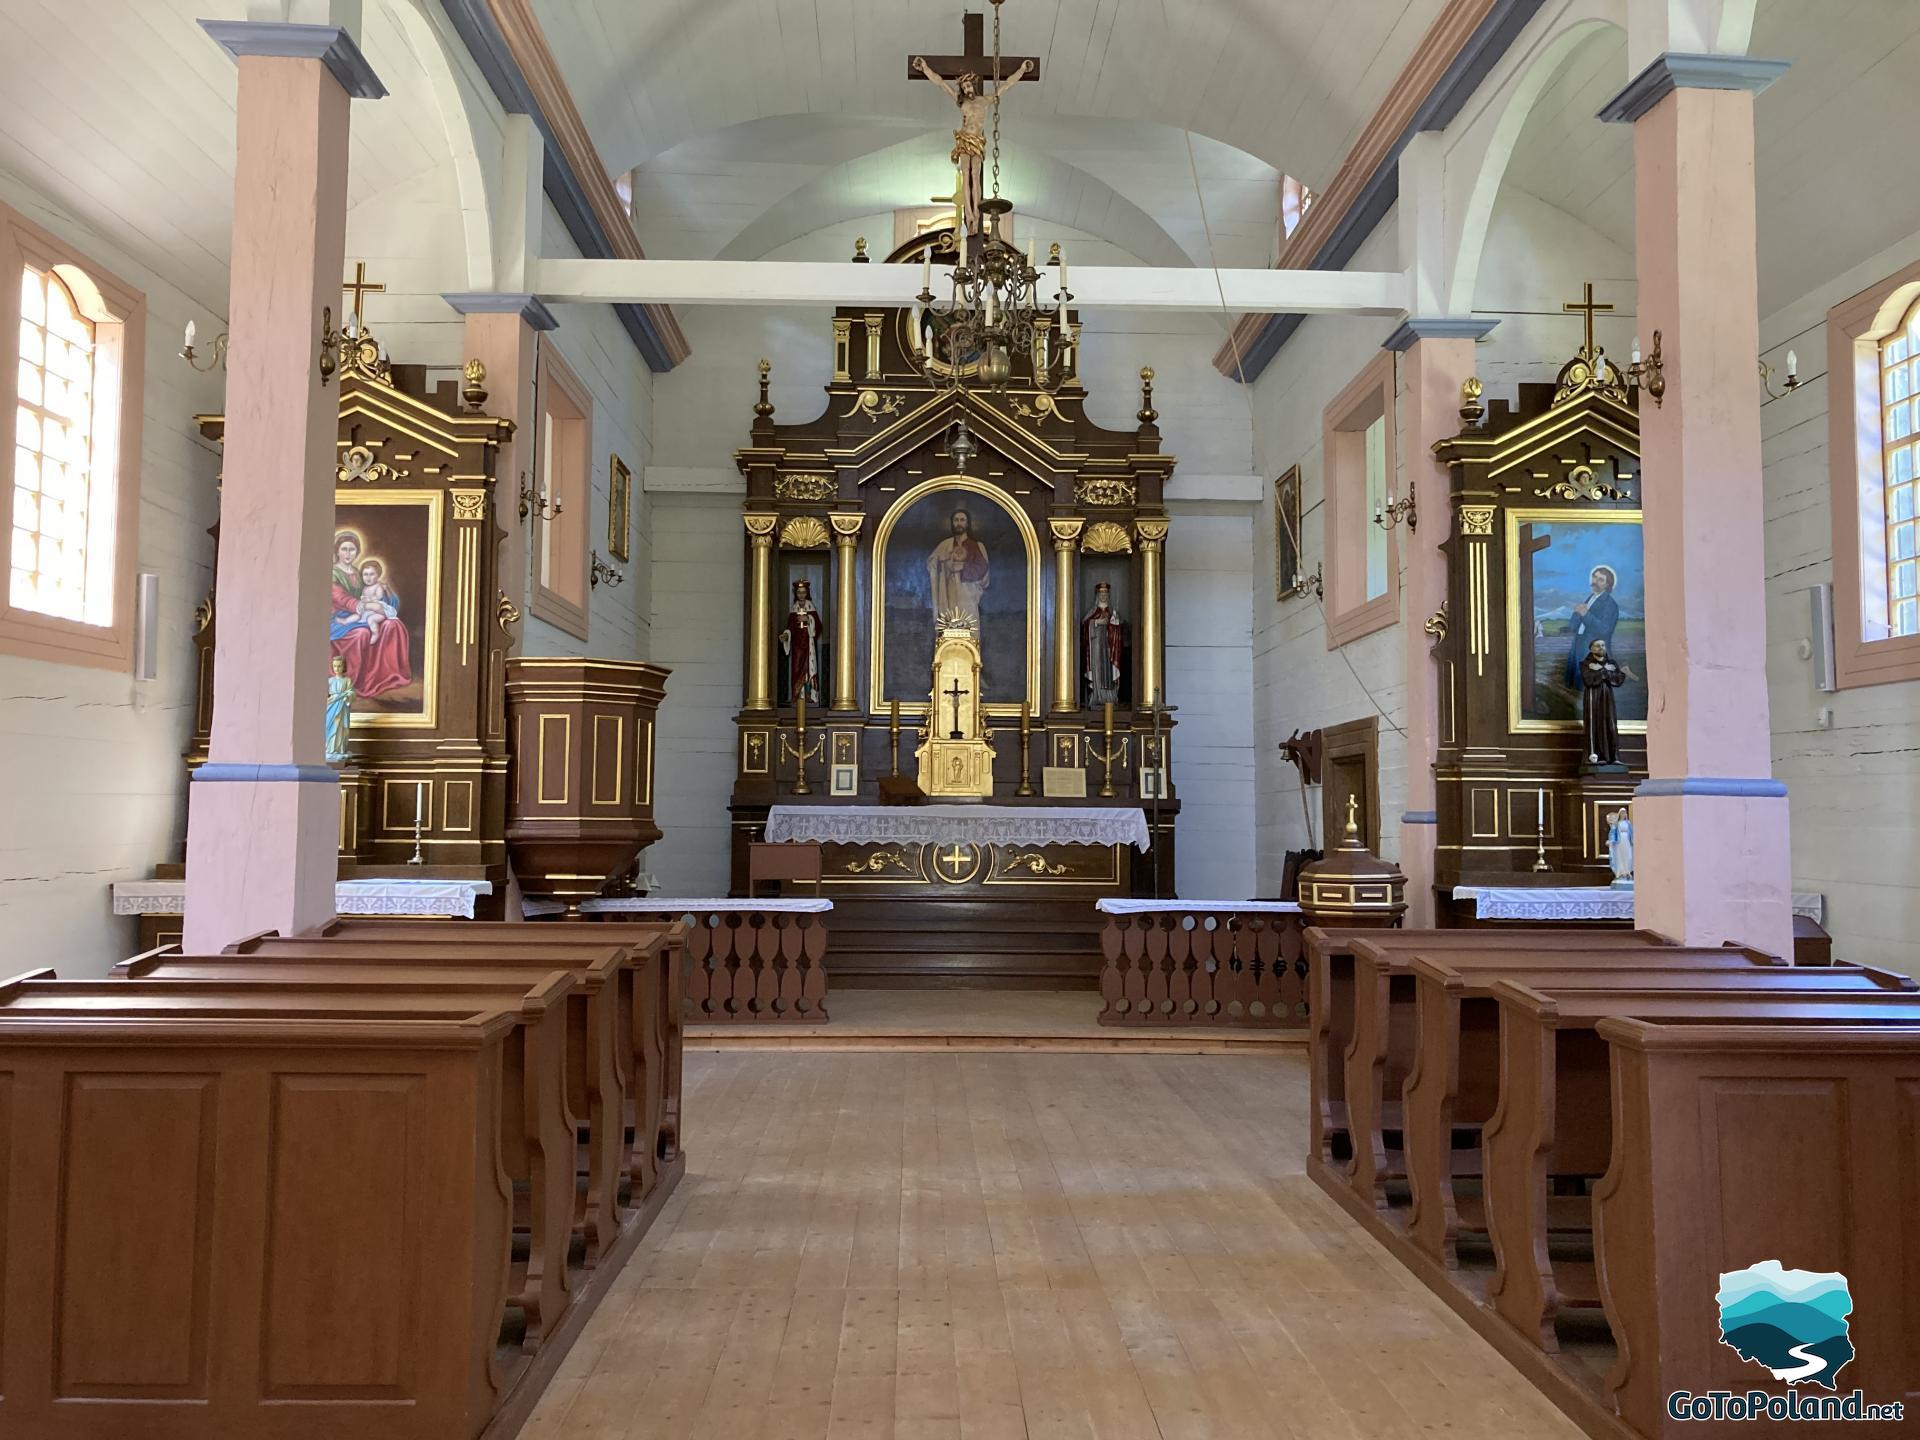 an interior of the church, main altar in the background, wooden benches